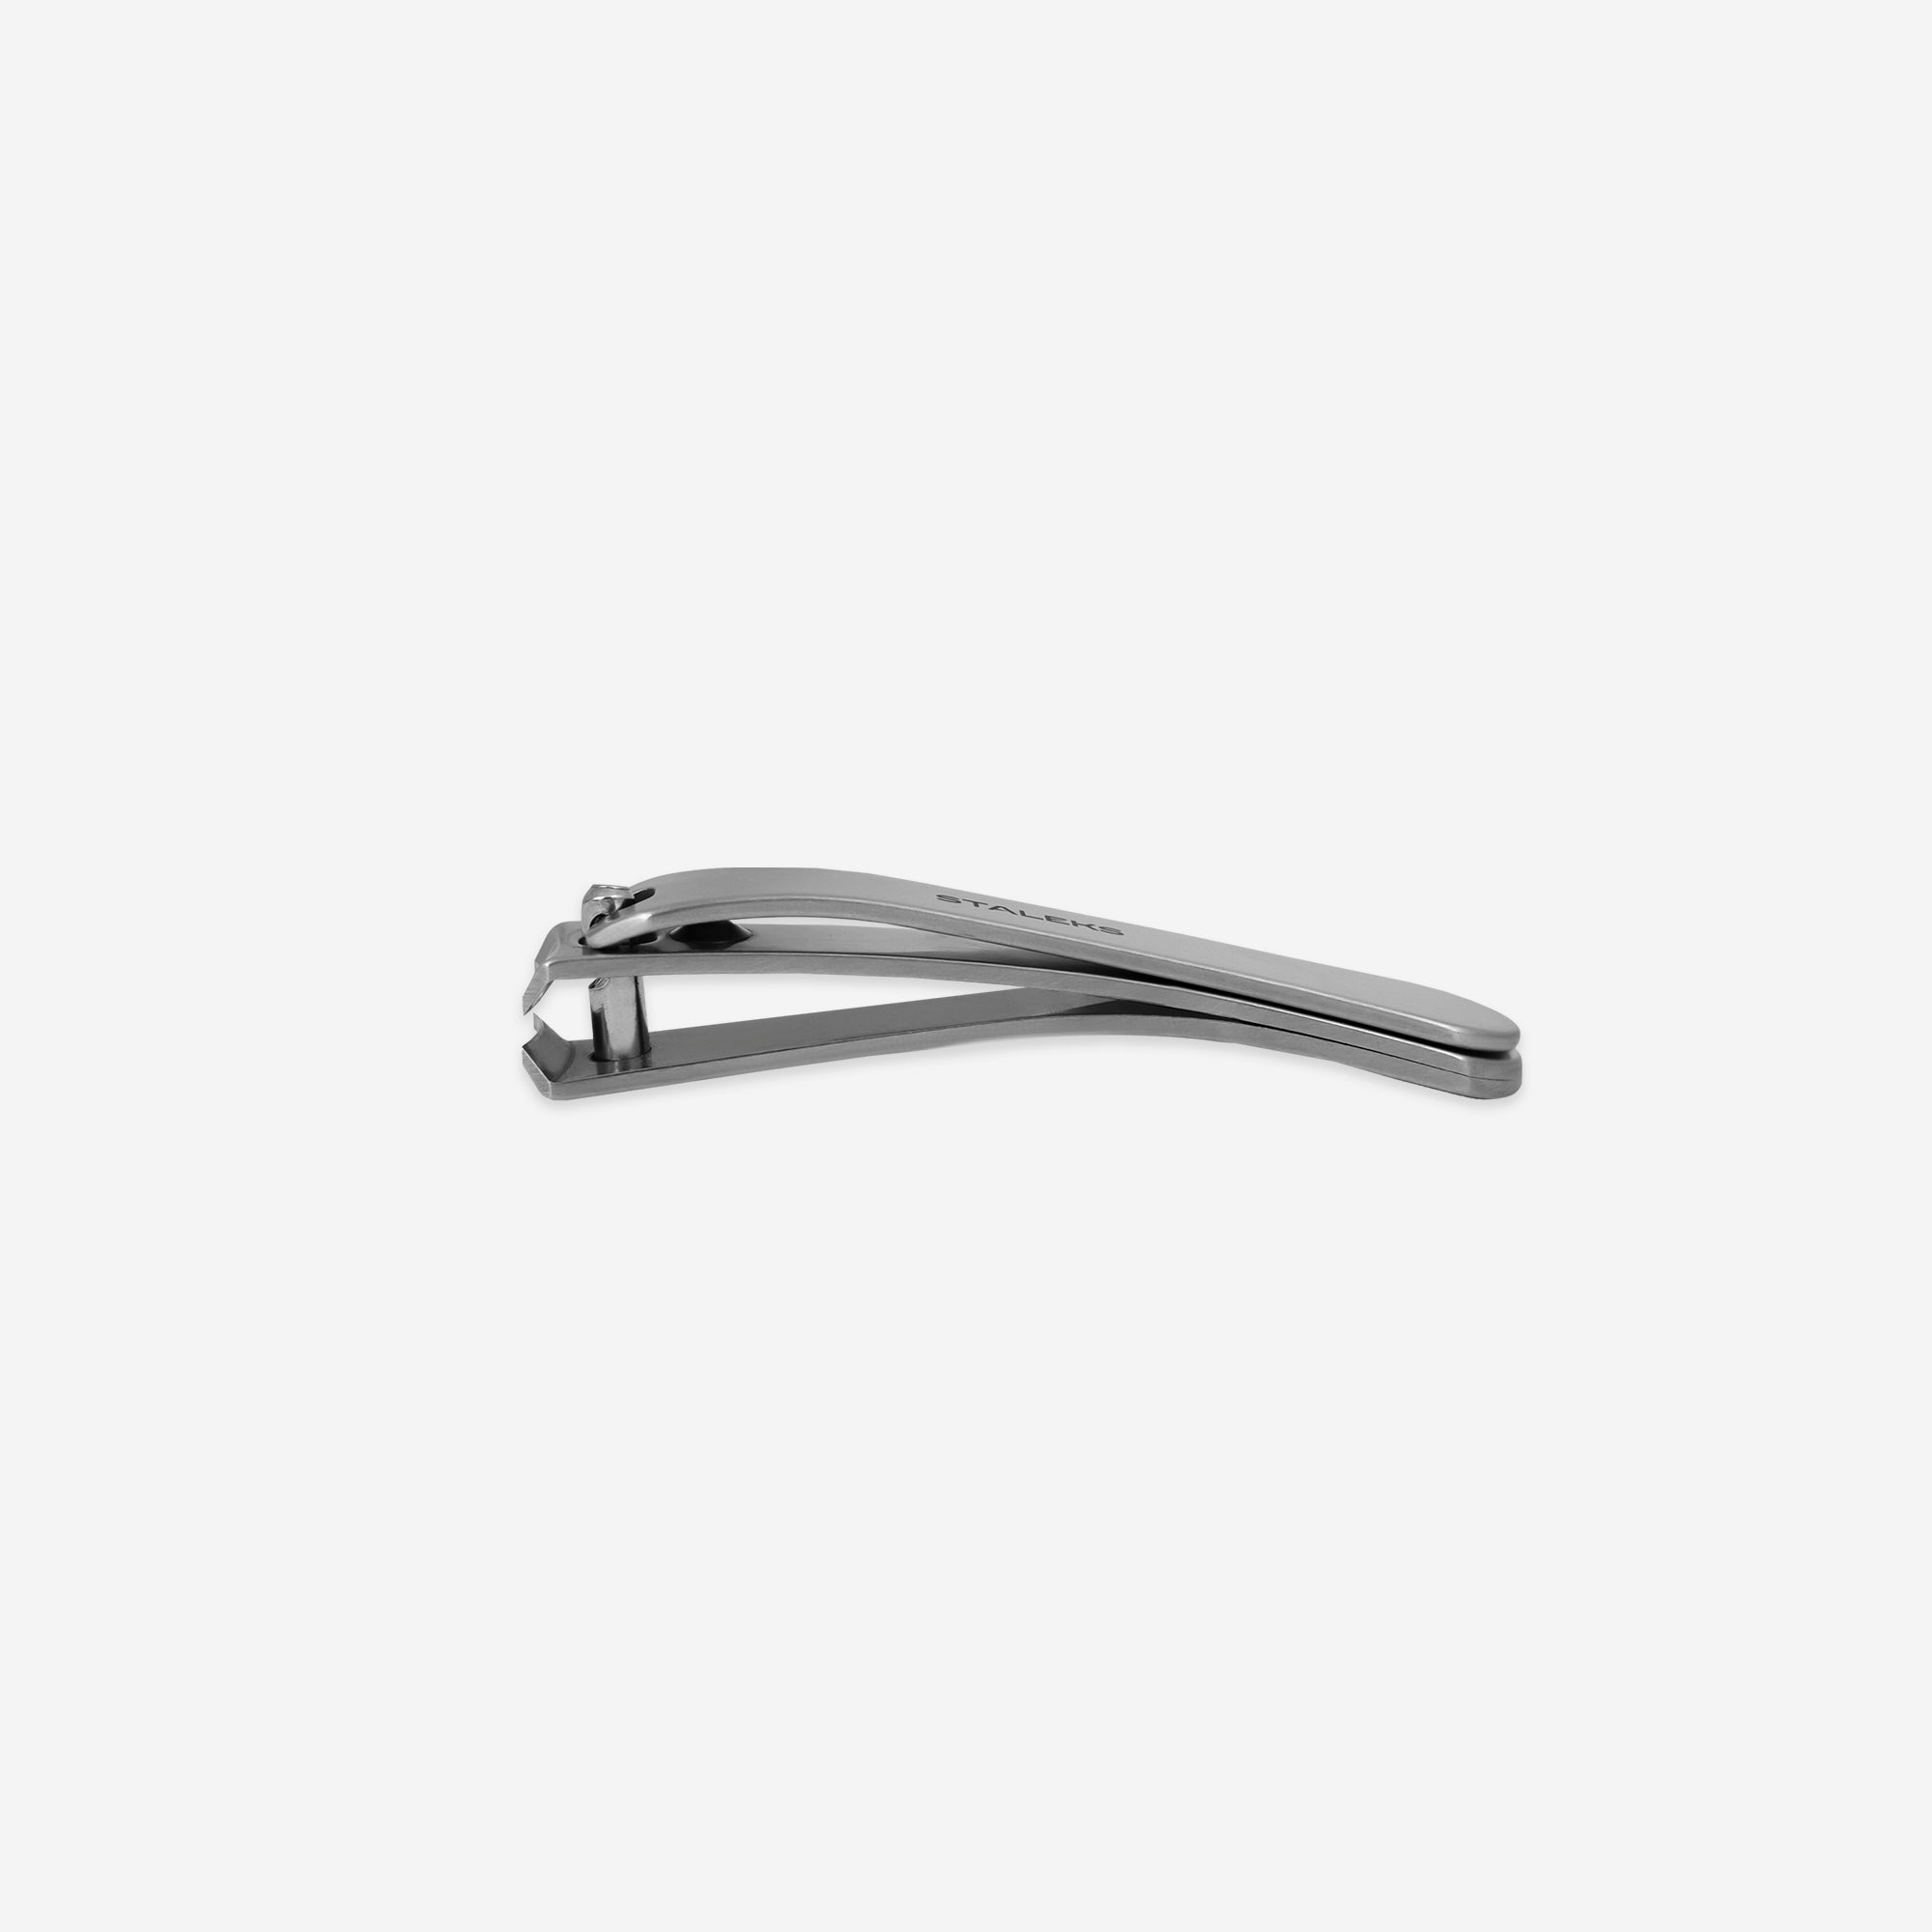 JW GripSoft Small Nail Clippers